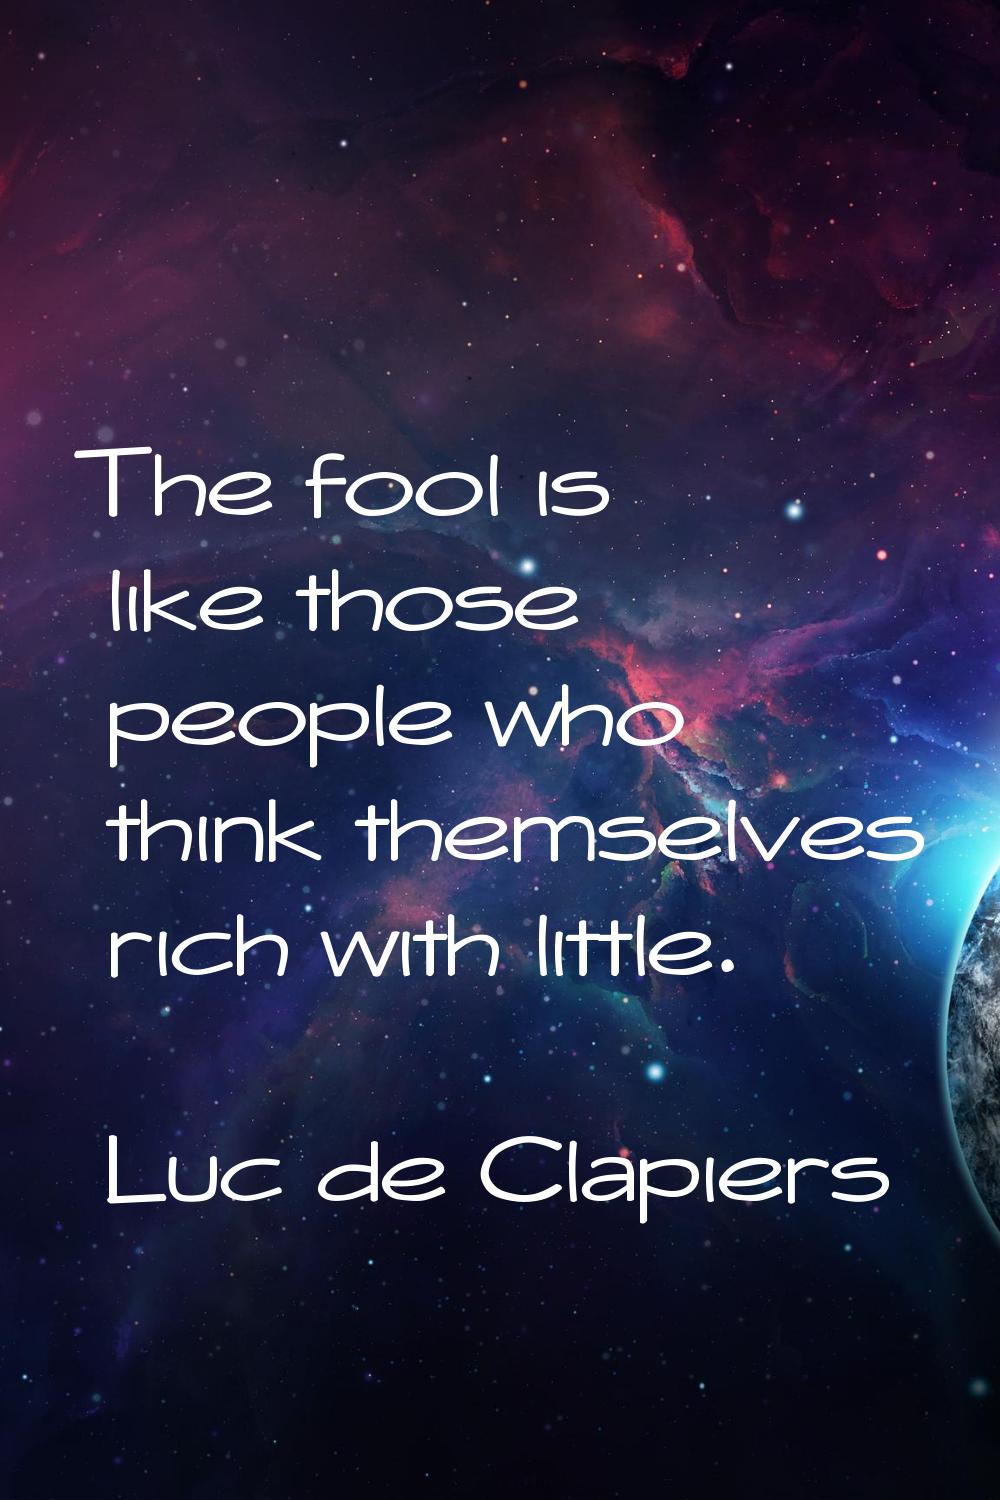 The fool is like those people who think themselves rich with little.